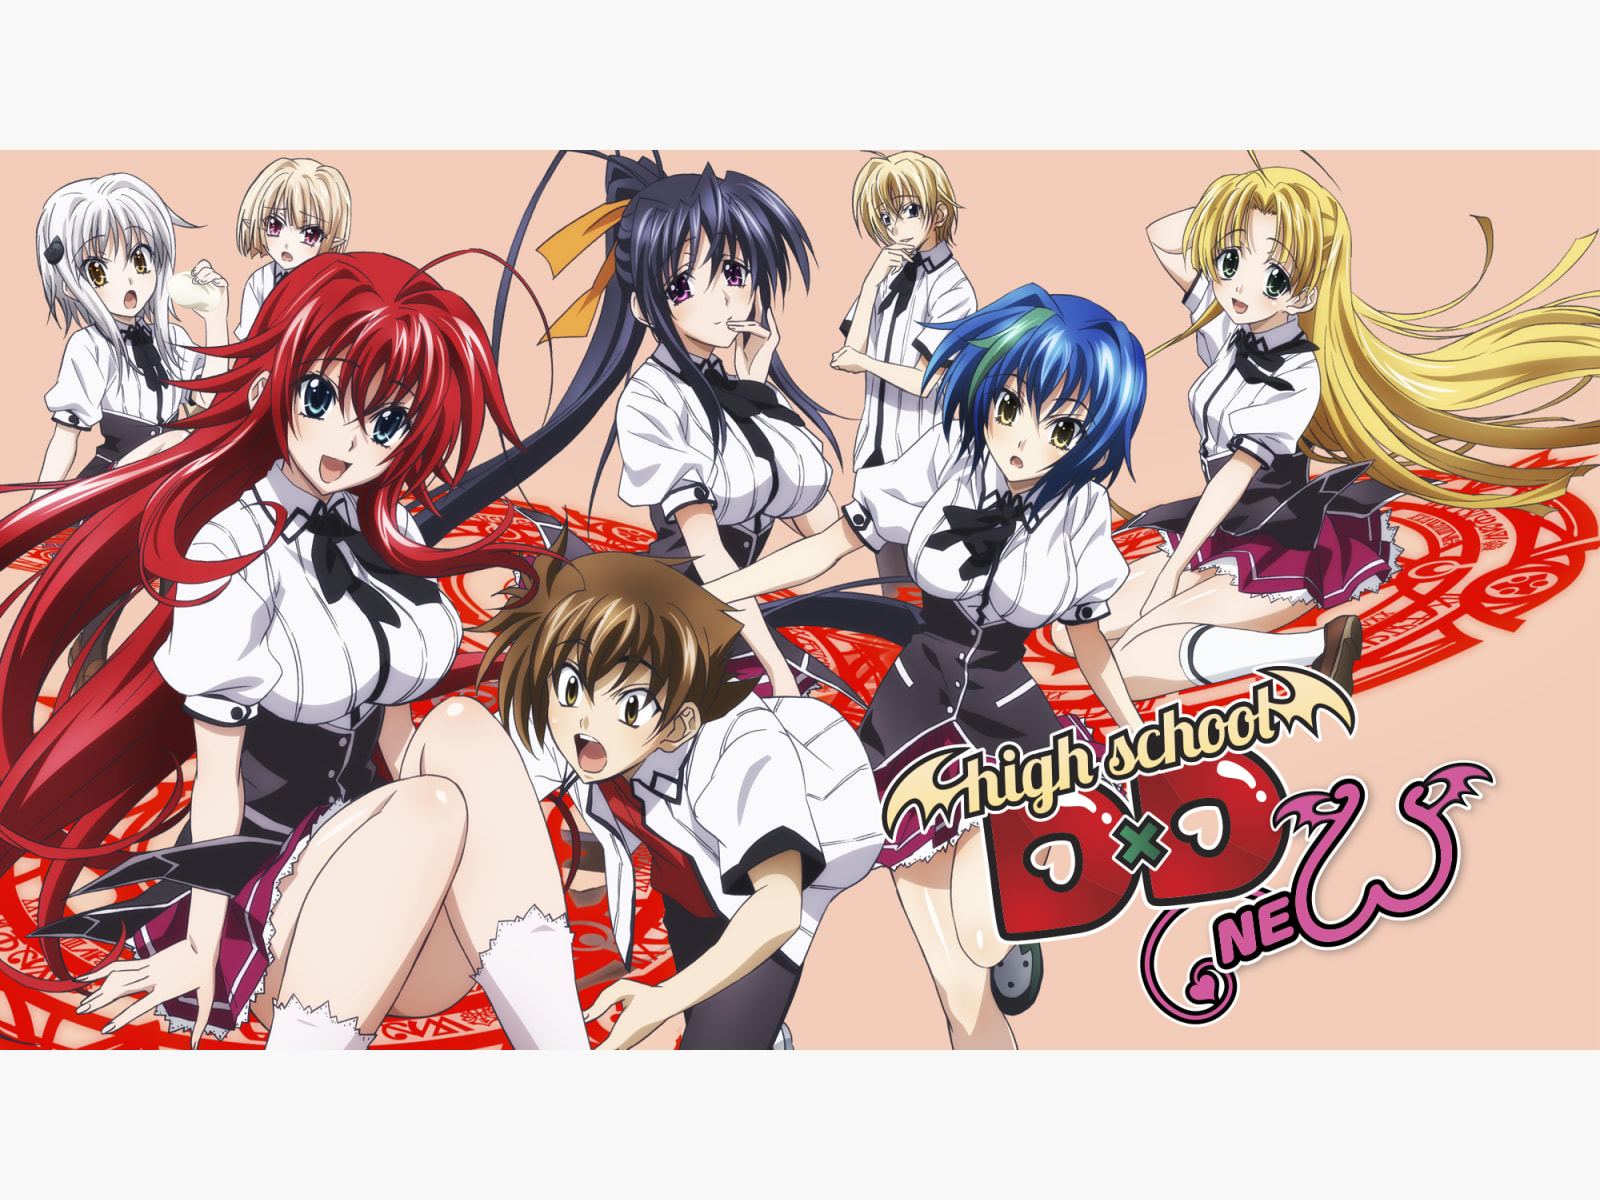 dagata recommends How To Watch Dxd In Order